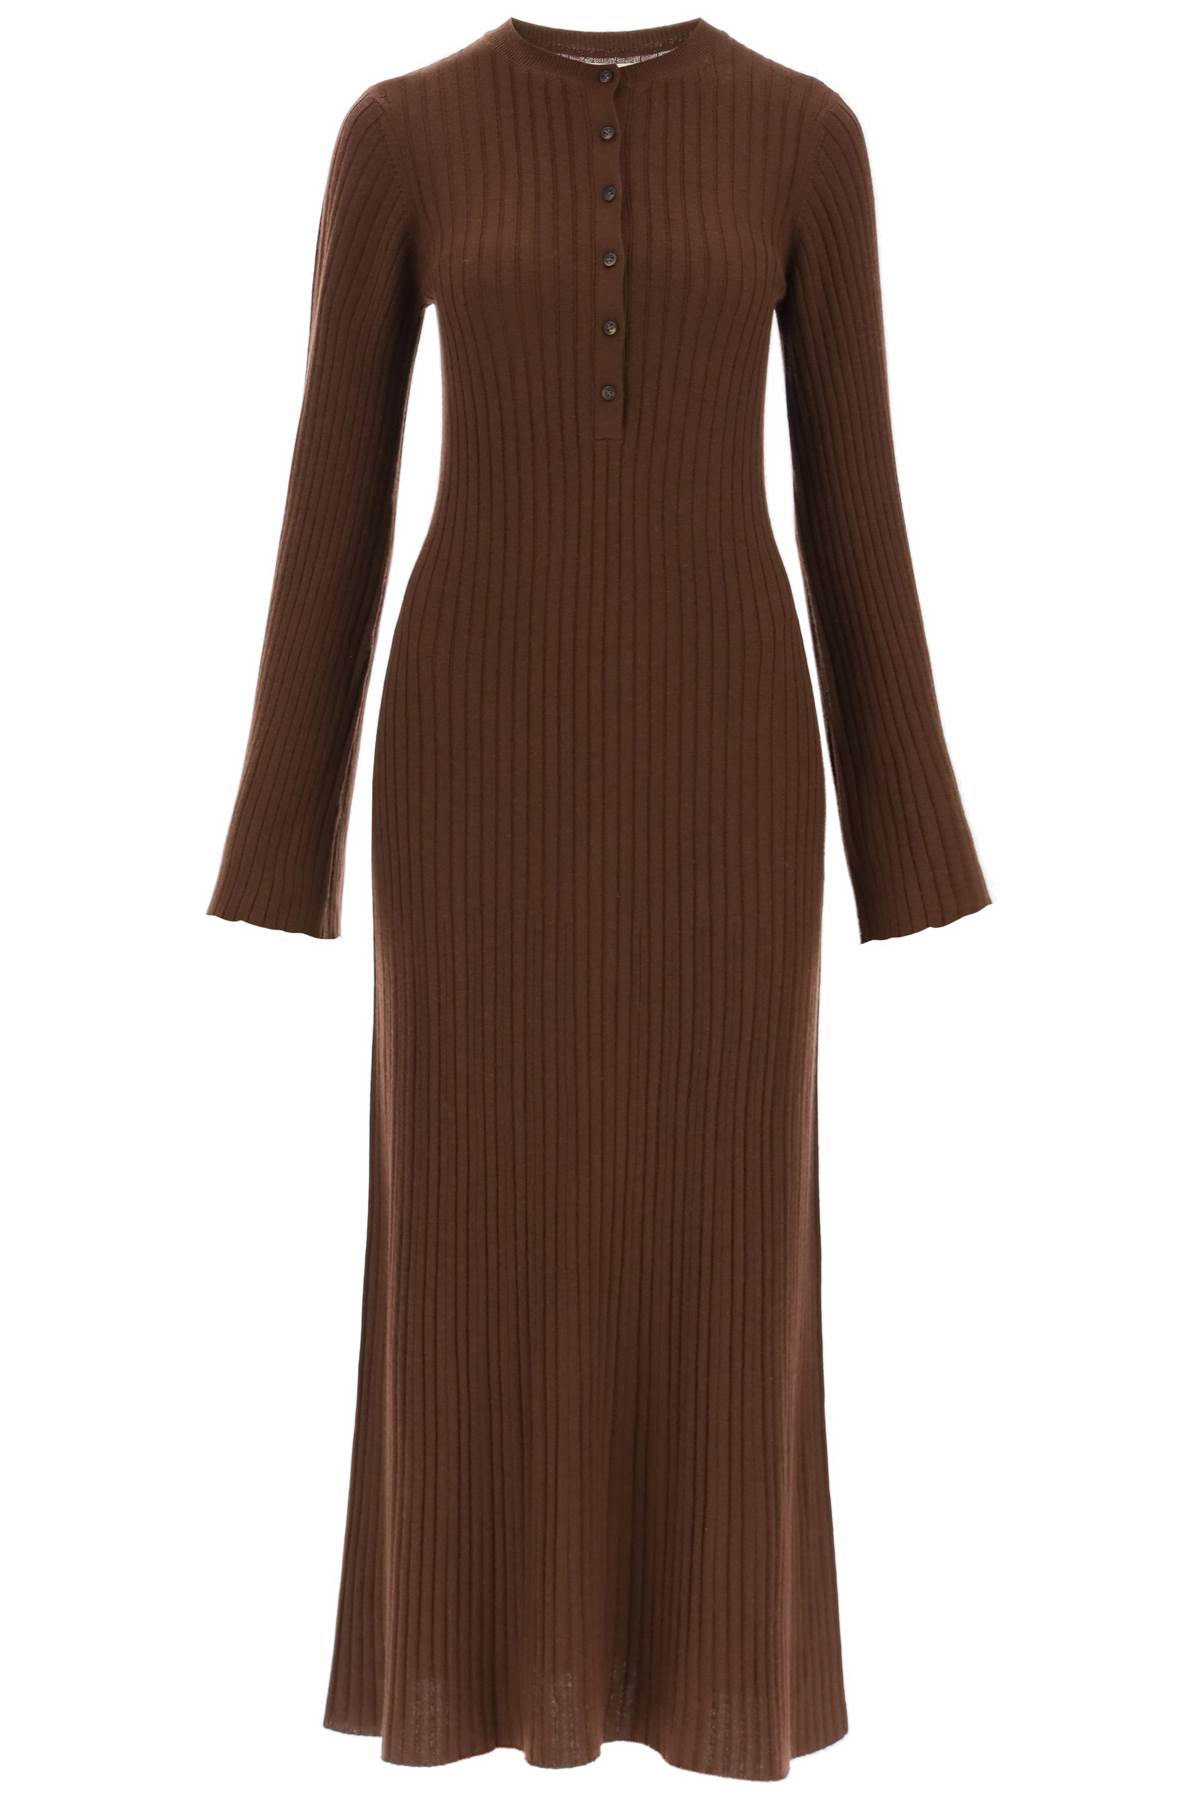 Loulou Studio Long eliav Dress In Ribbed Wool And Cashmer Knit